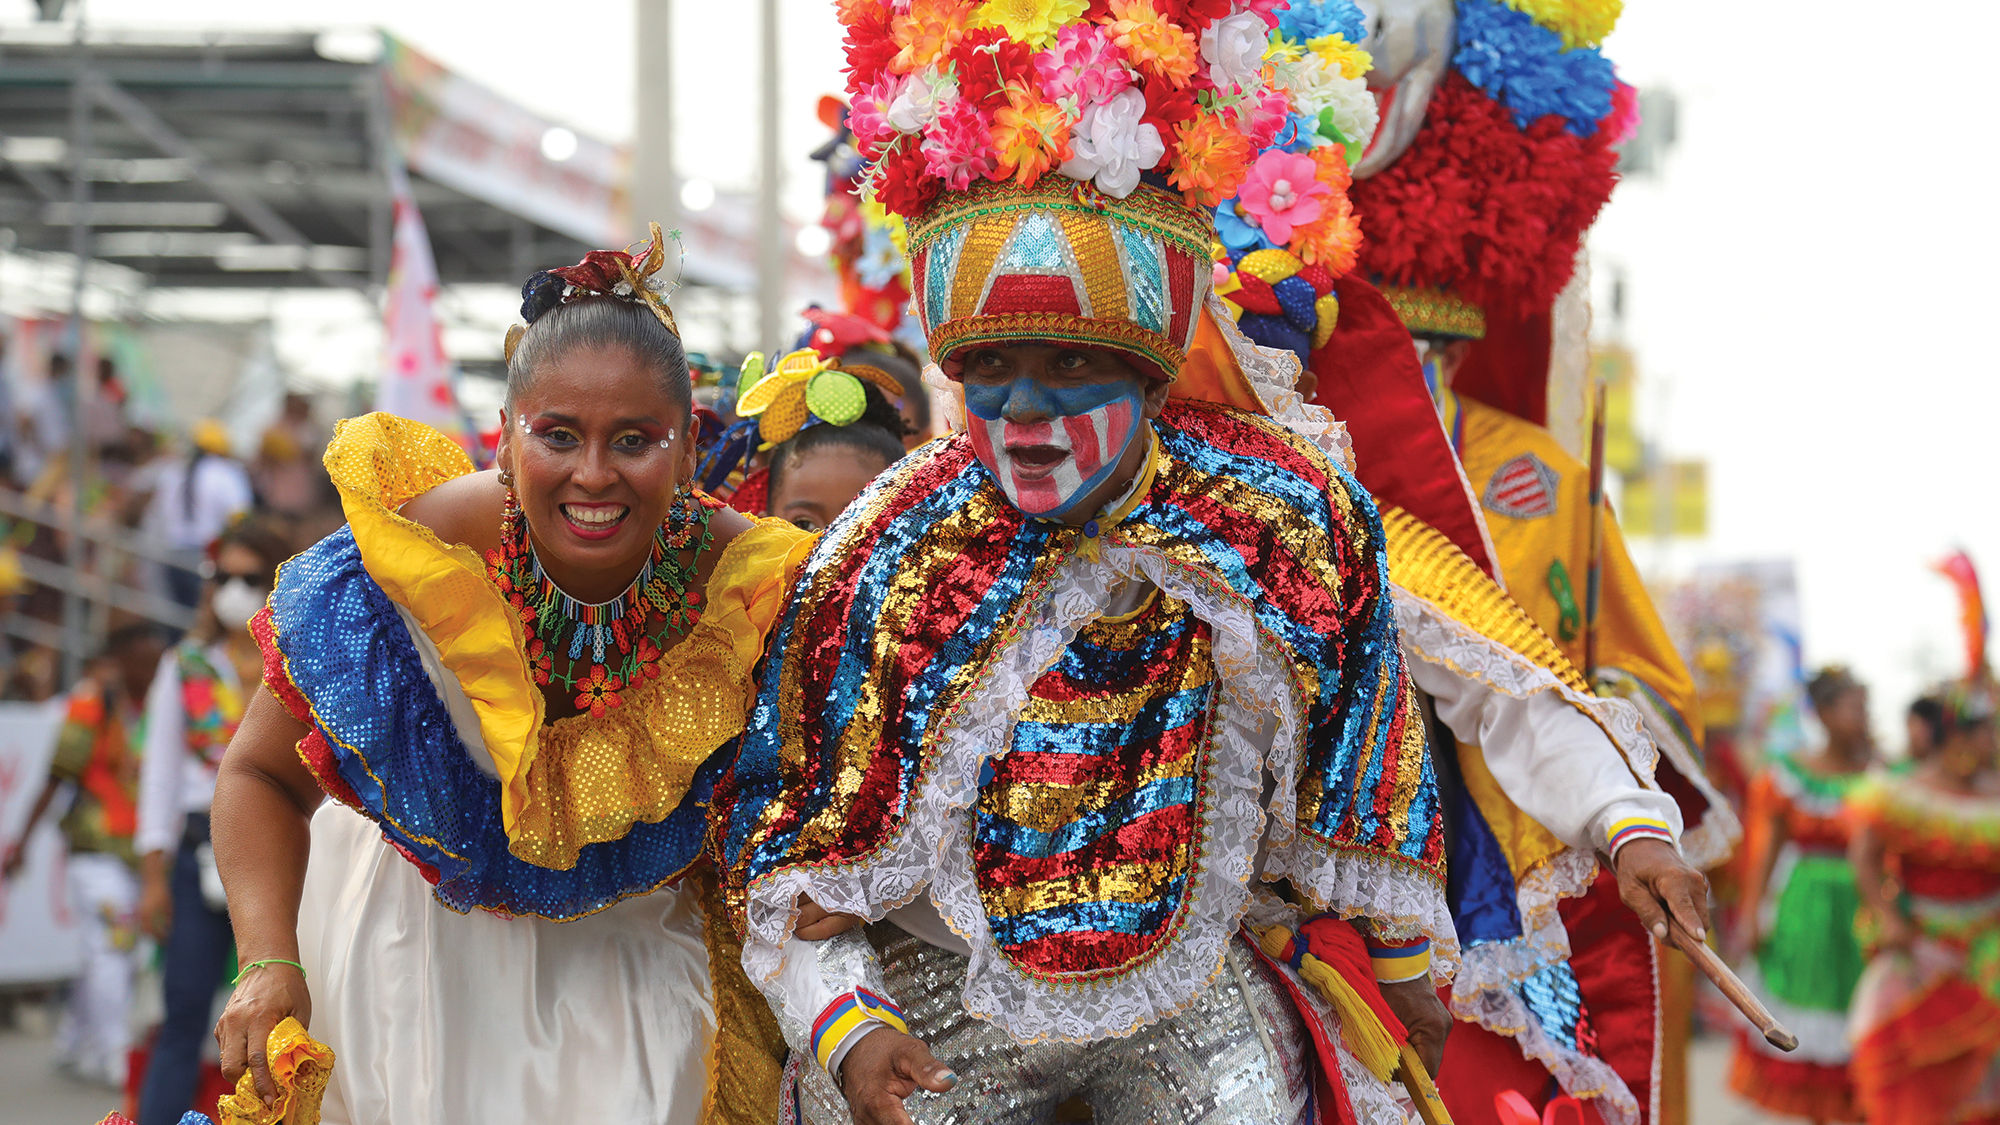 Carnival celebrations in Barranquilla will be part part of AmaWaterways' Colombia itineraries.